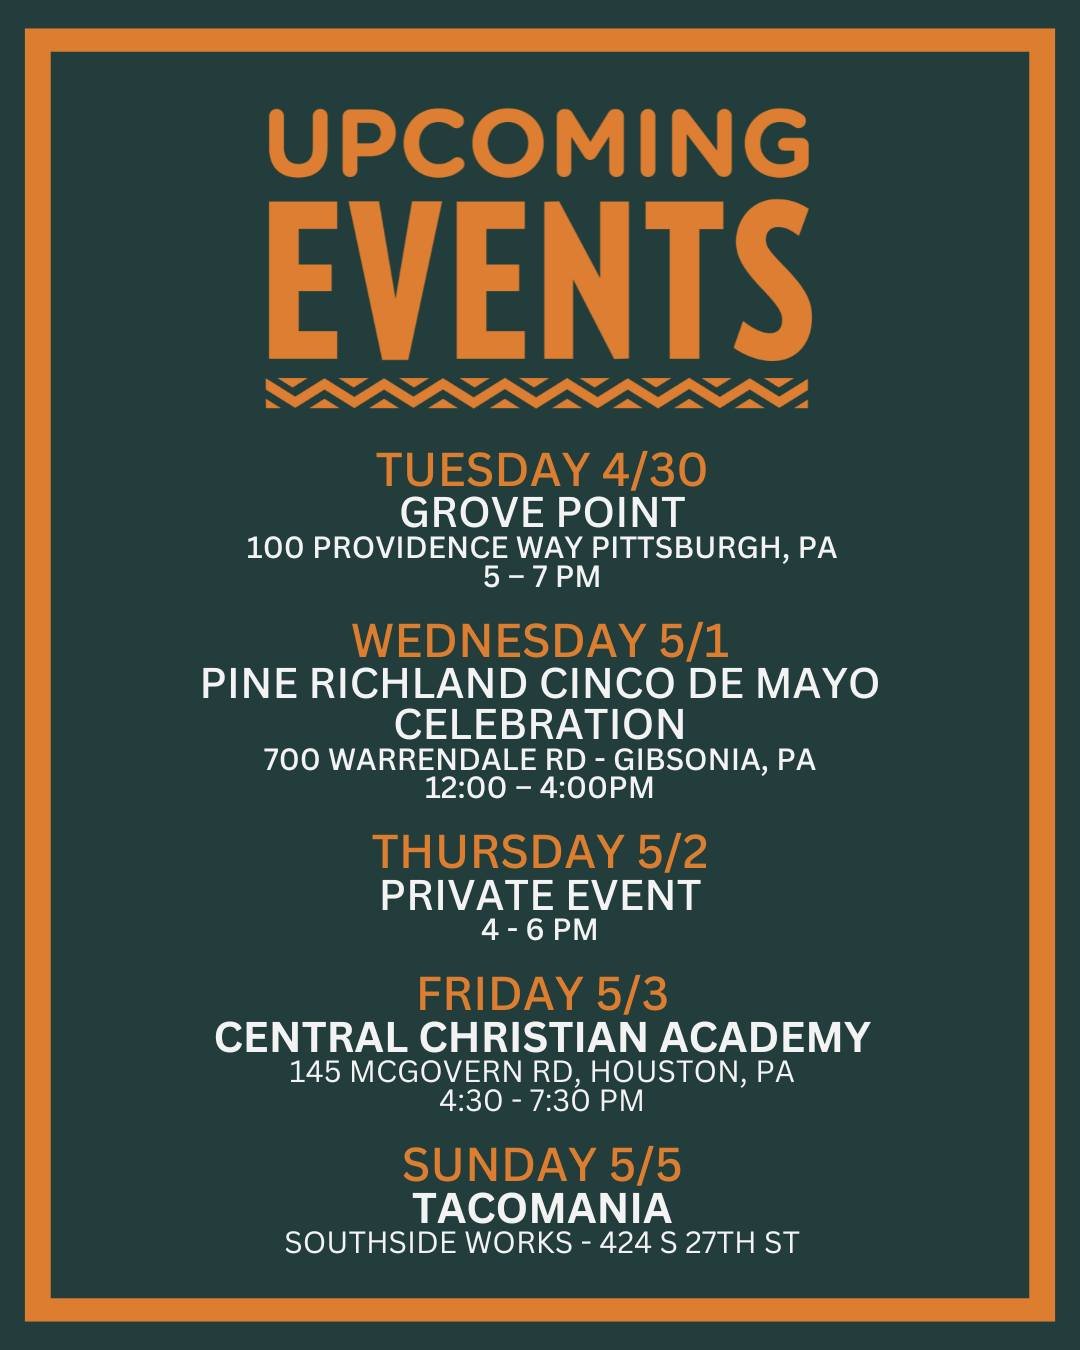 Get ready to celebrate Cinco de Mayo all week long with our flavor-packed schedule! 

Gather your crew, mark your calendars, and let's make this Cinco de Mayo one for the books! 🌮🚚 

#CincoDeMayoFiesta #TacoTruck #pghfood #pitsburghfood